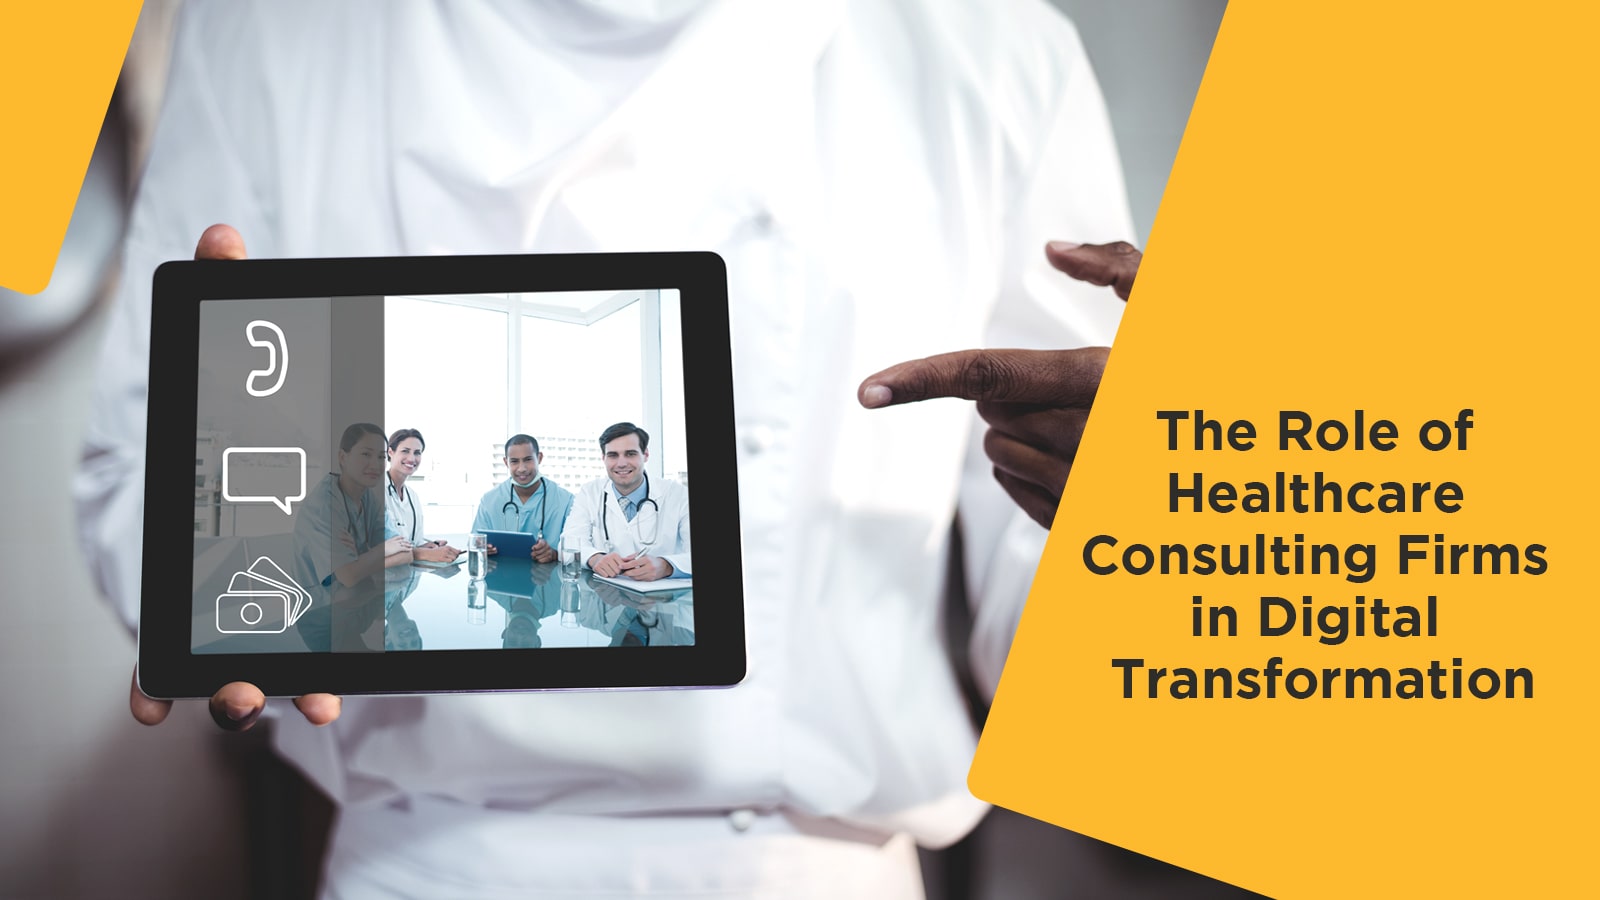 Healthcare Consulting Firms in Digital Transformation